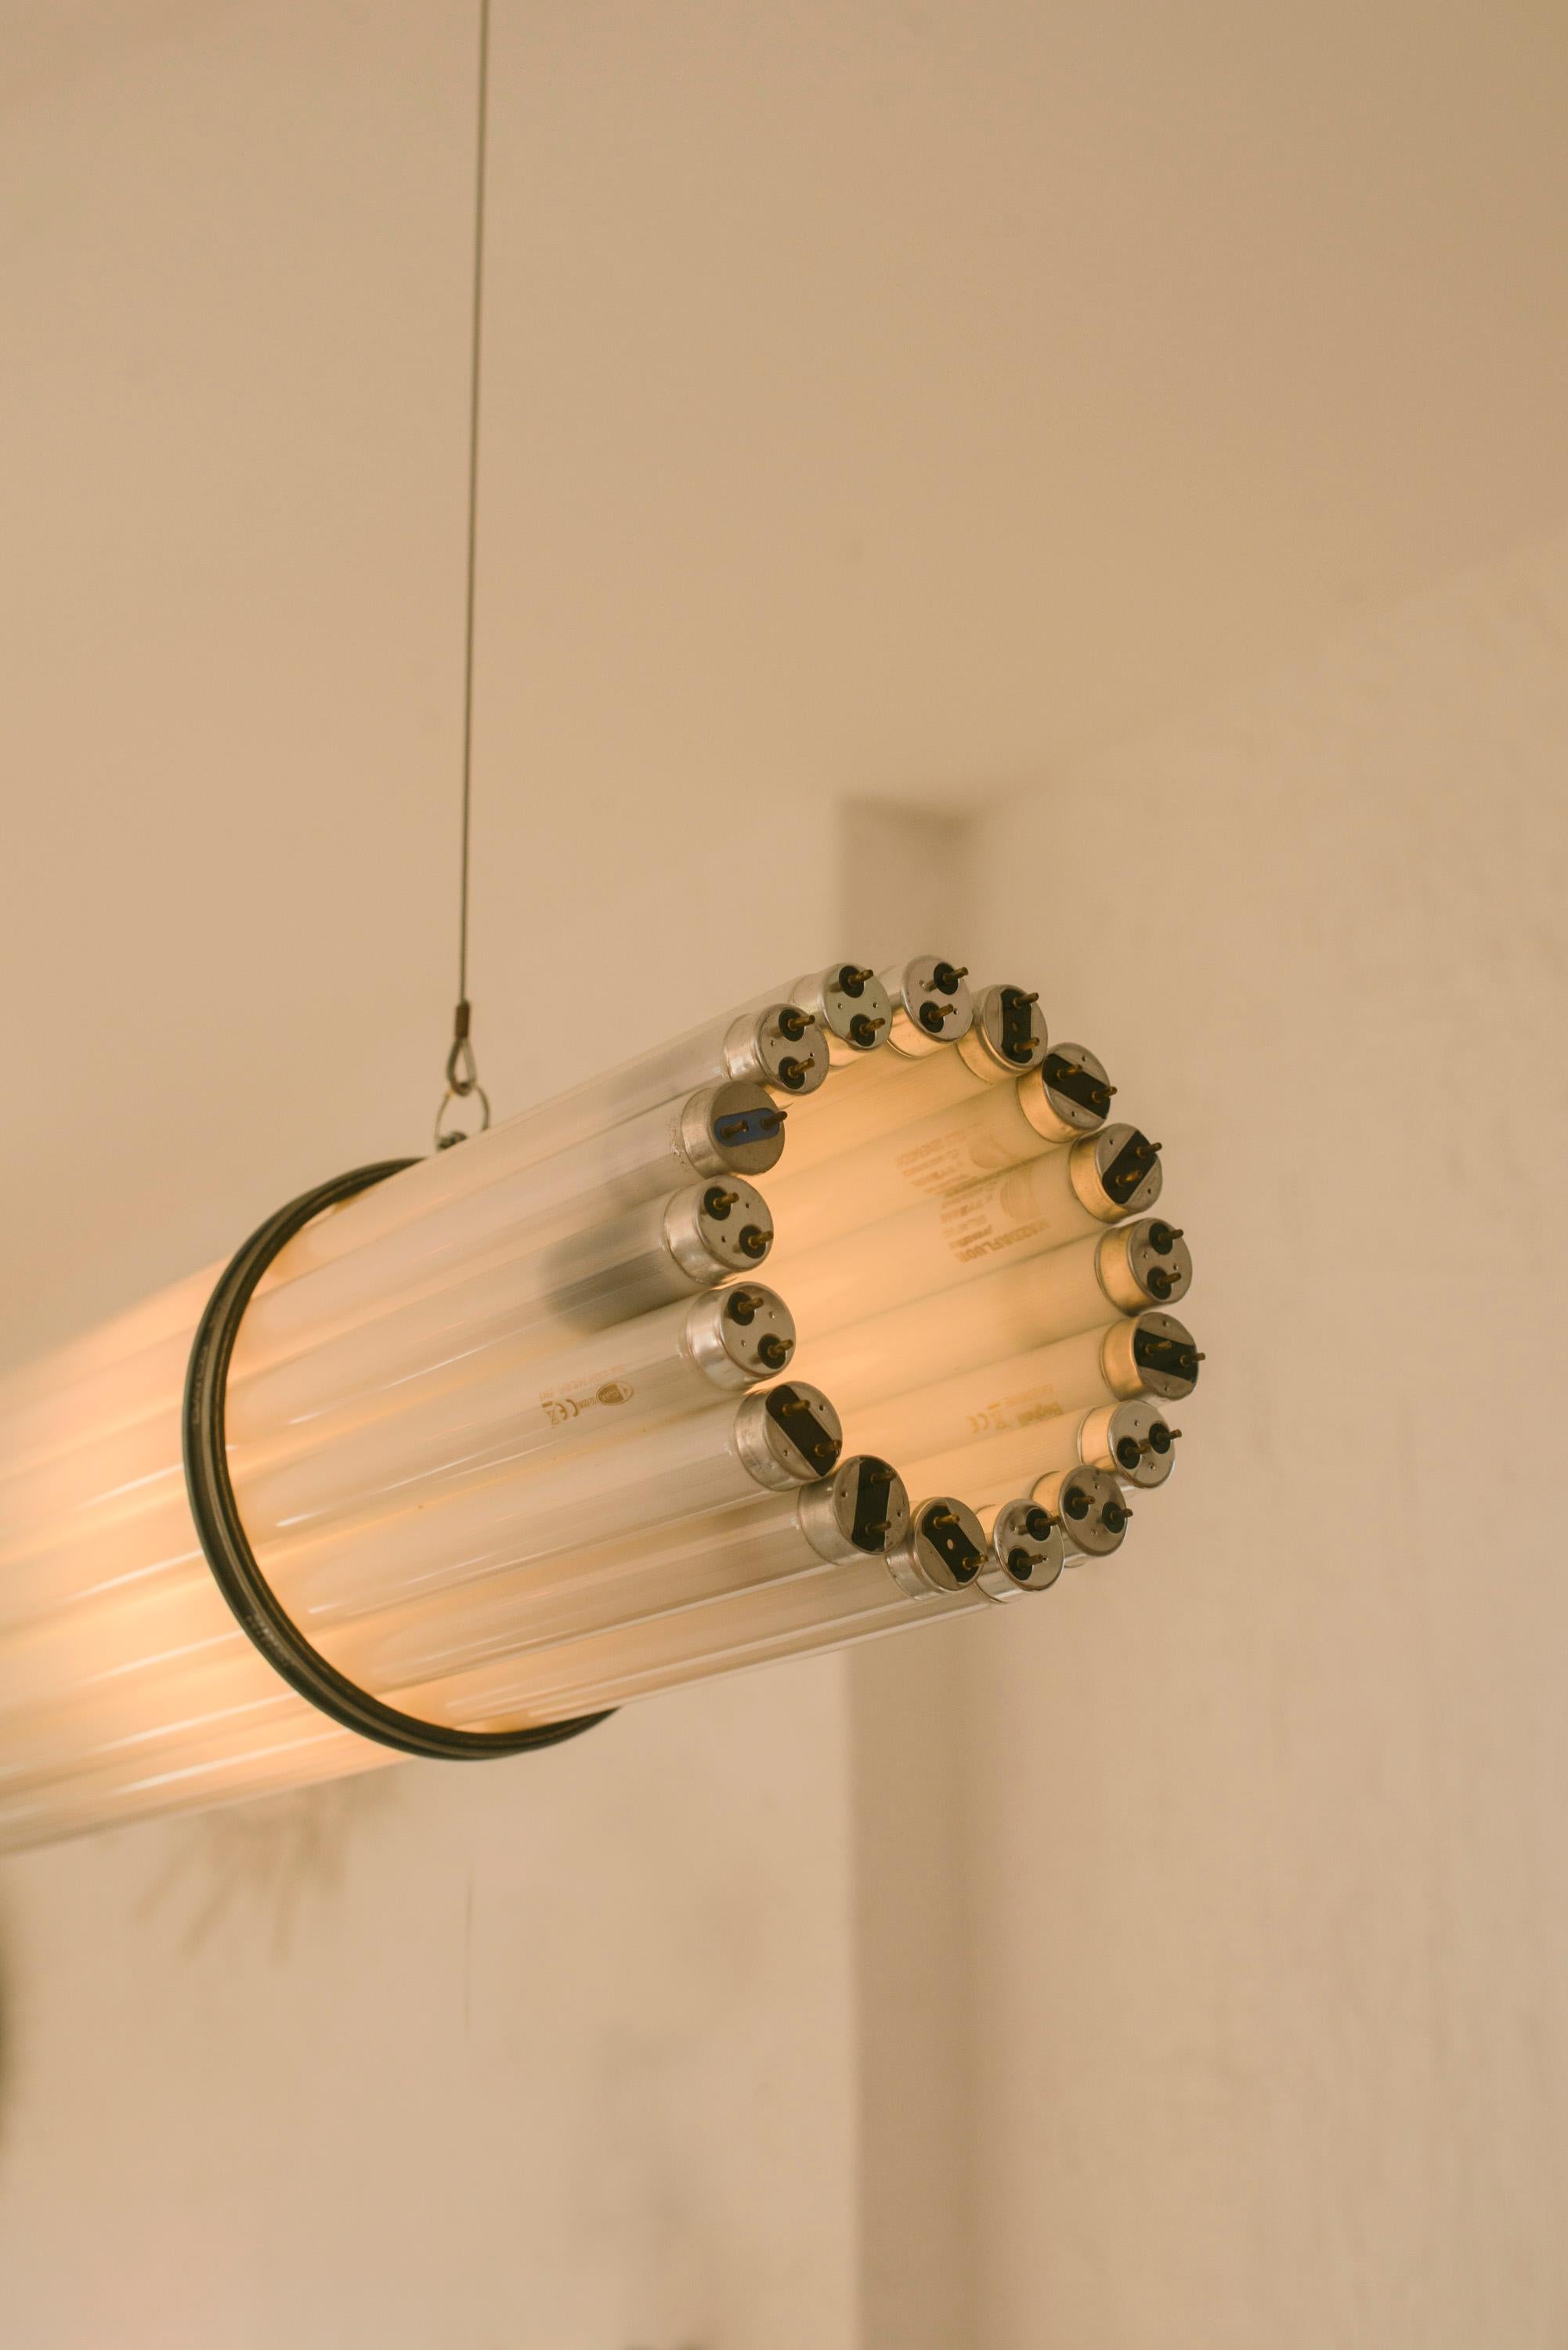 Contemporary Handcrafted Hanging Light with Recycled Neons, Estudio Juliette, Ibiza, 2020